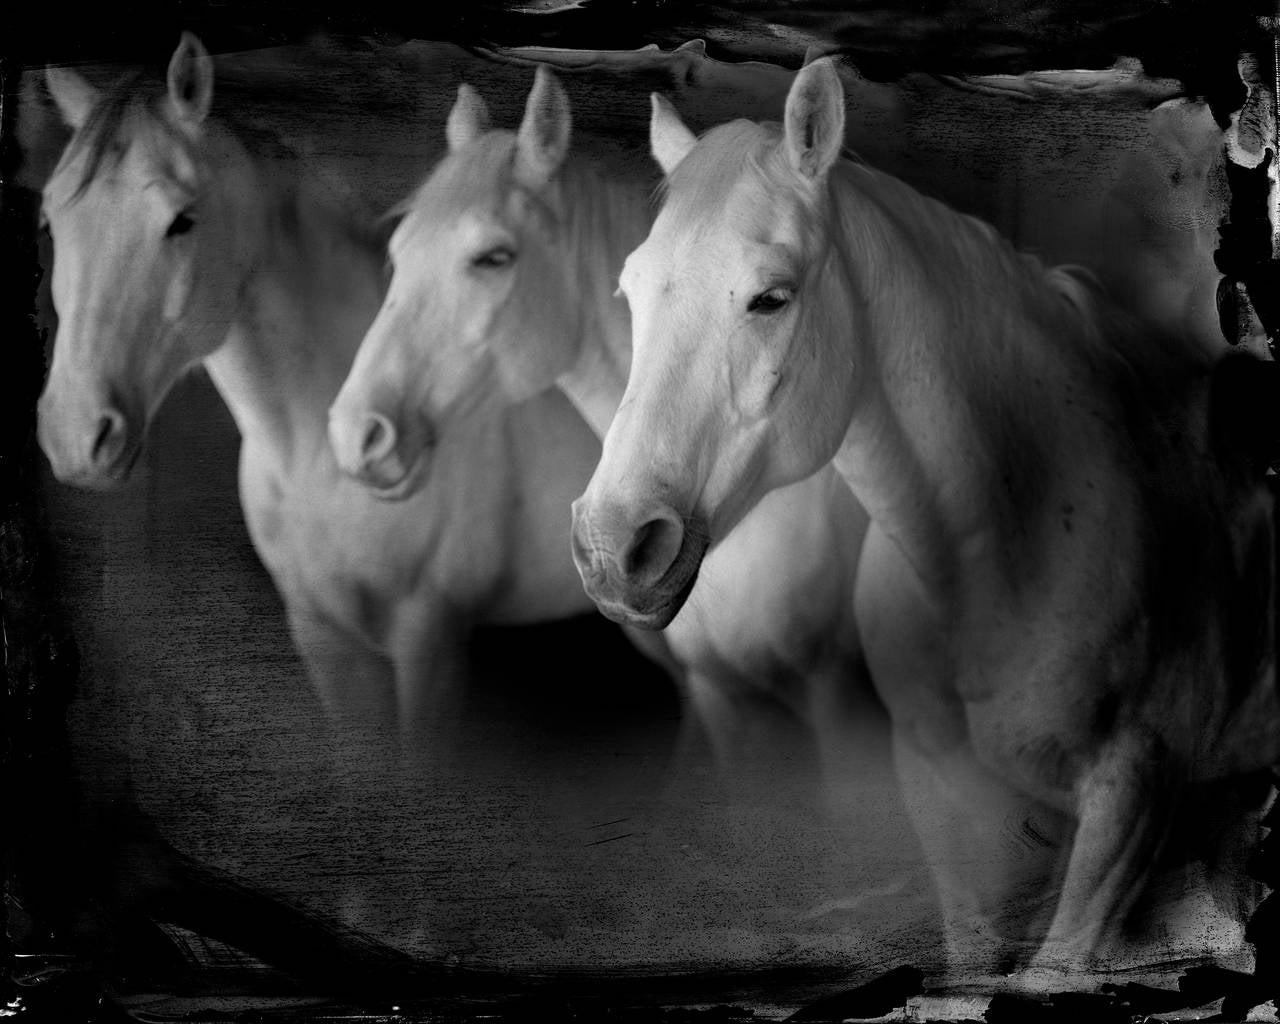 Keith Carter b.1948 Black and White Photograph - Tres Blancos, limited edition, archival pigment ink print, signed and numbered 